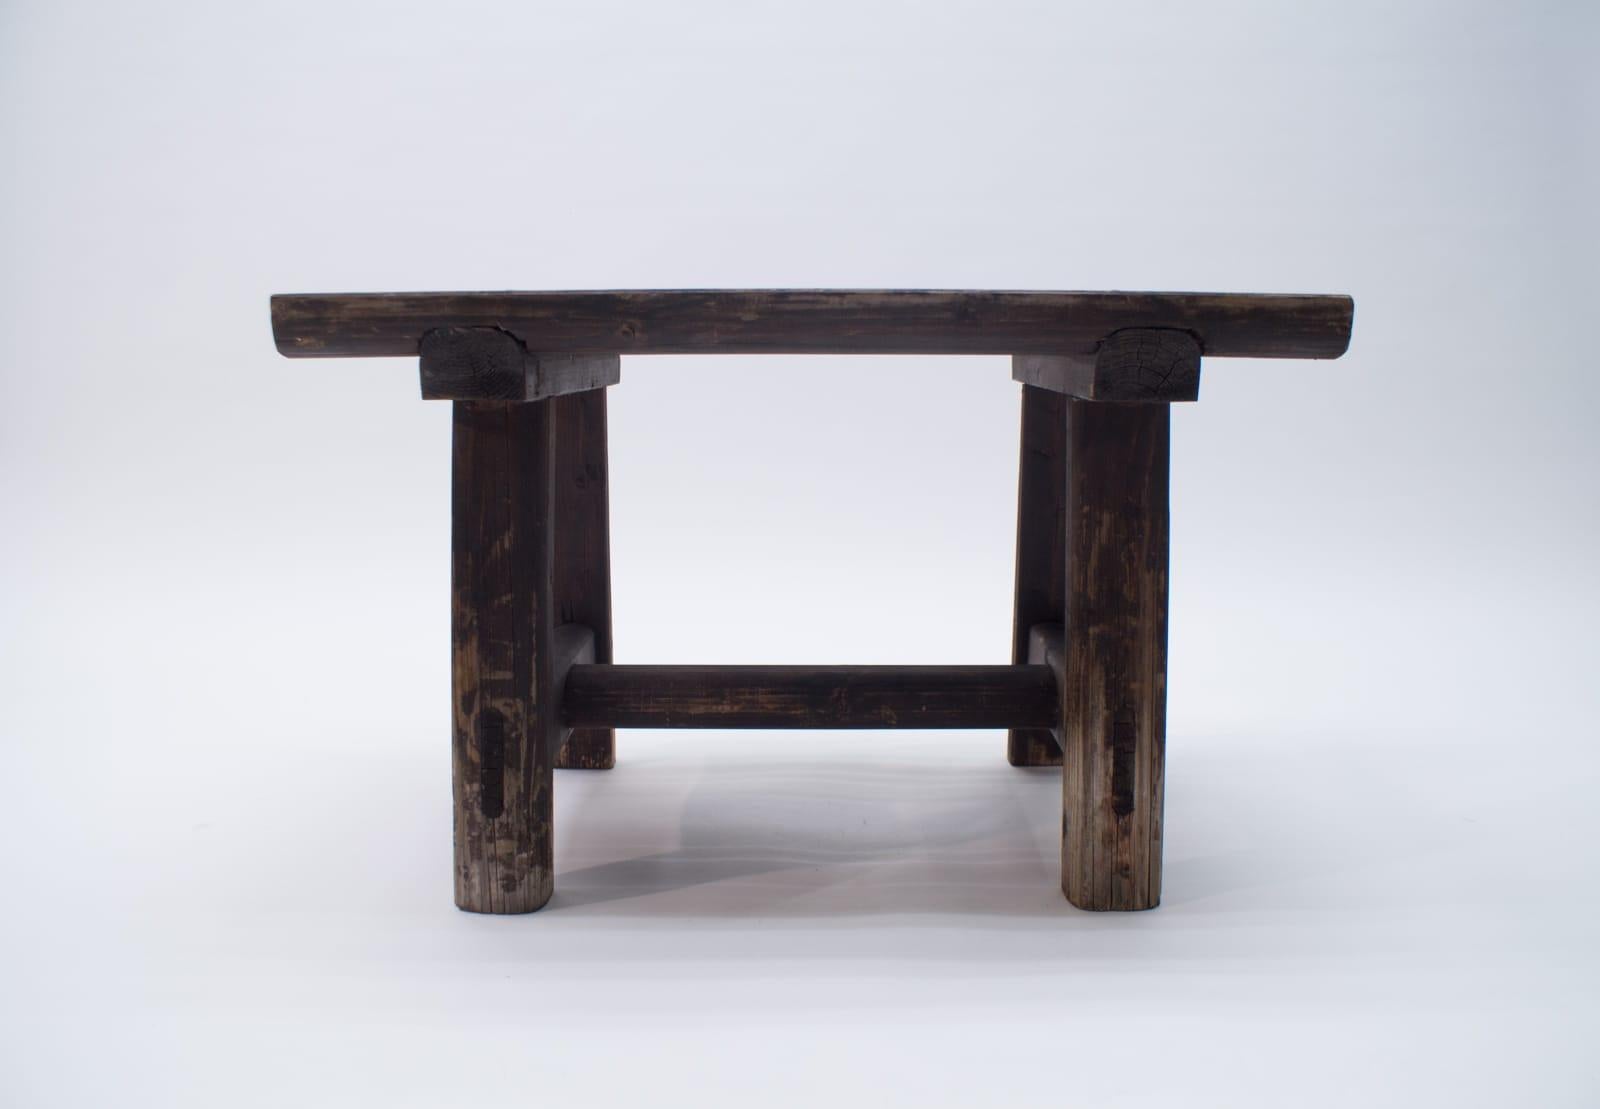 Mid-20th Century Black Forest Wooden Bench, 1930s-1940s Germany